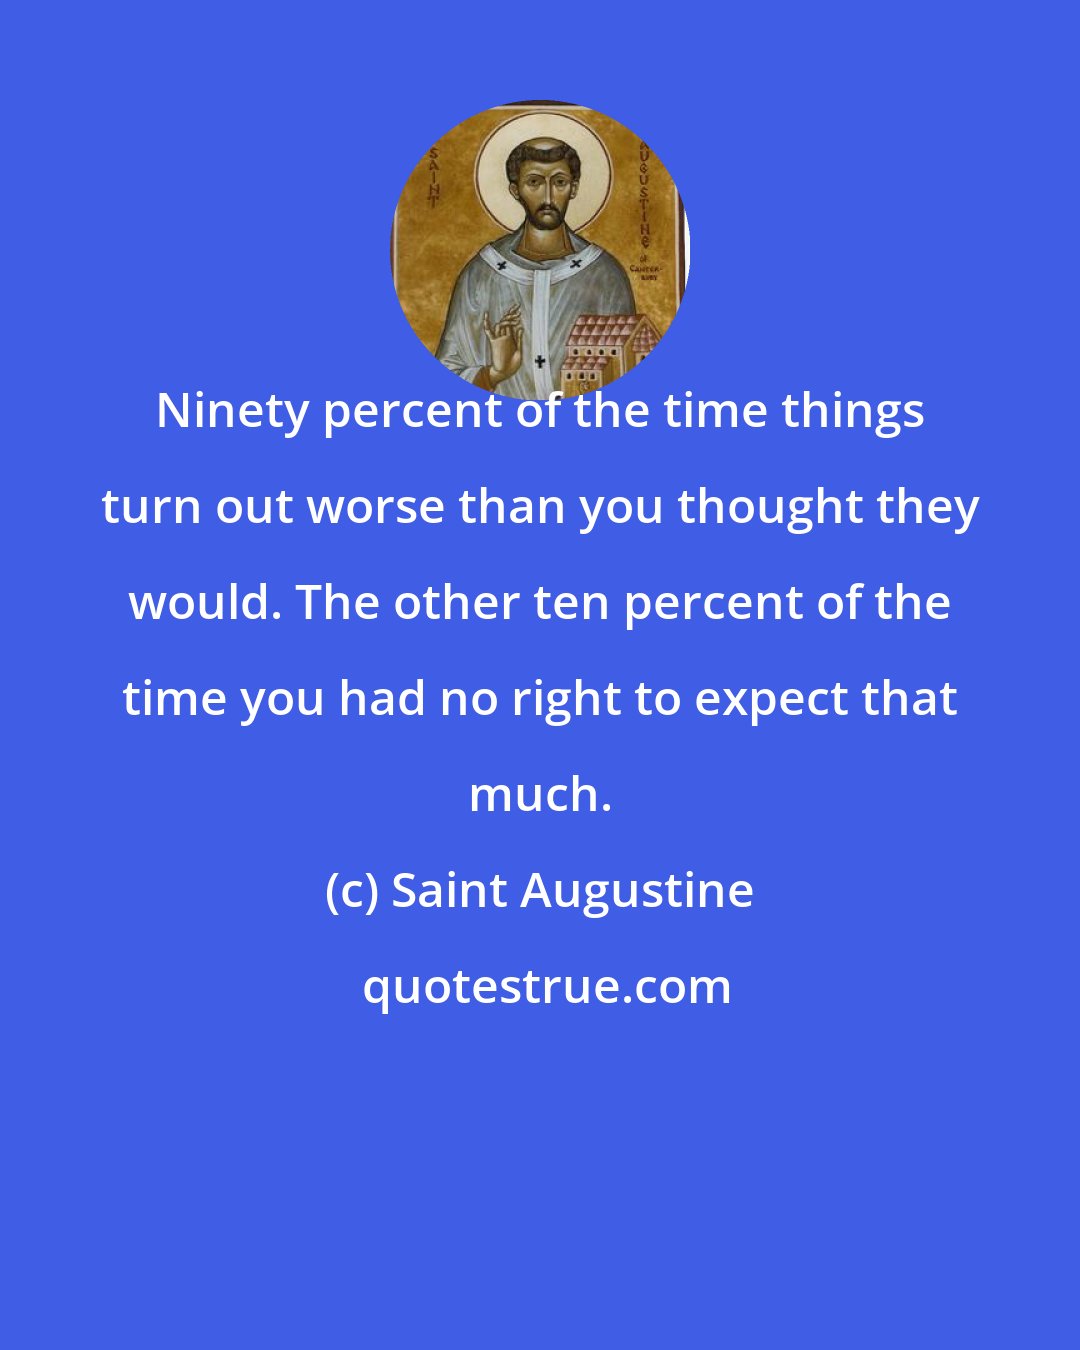 Saint Augustine: Ninety percent of the time things turn out worse than you thought they would. The other ten percent of the time you had no right to expect that much.